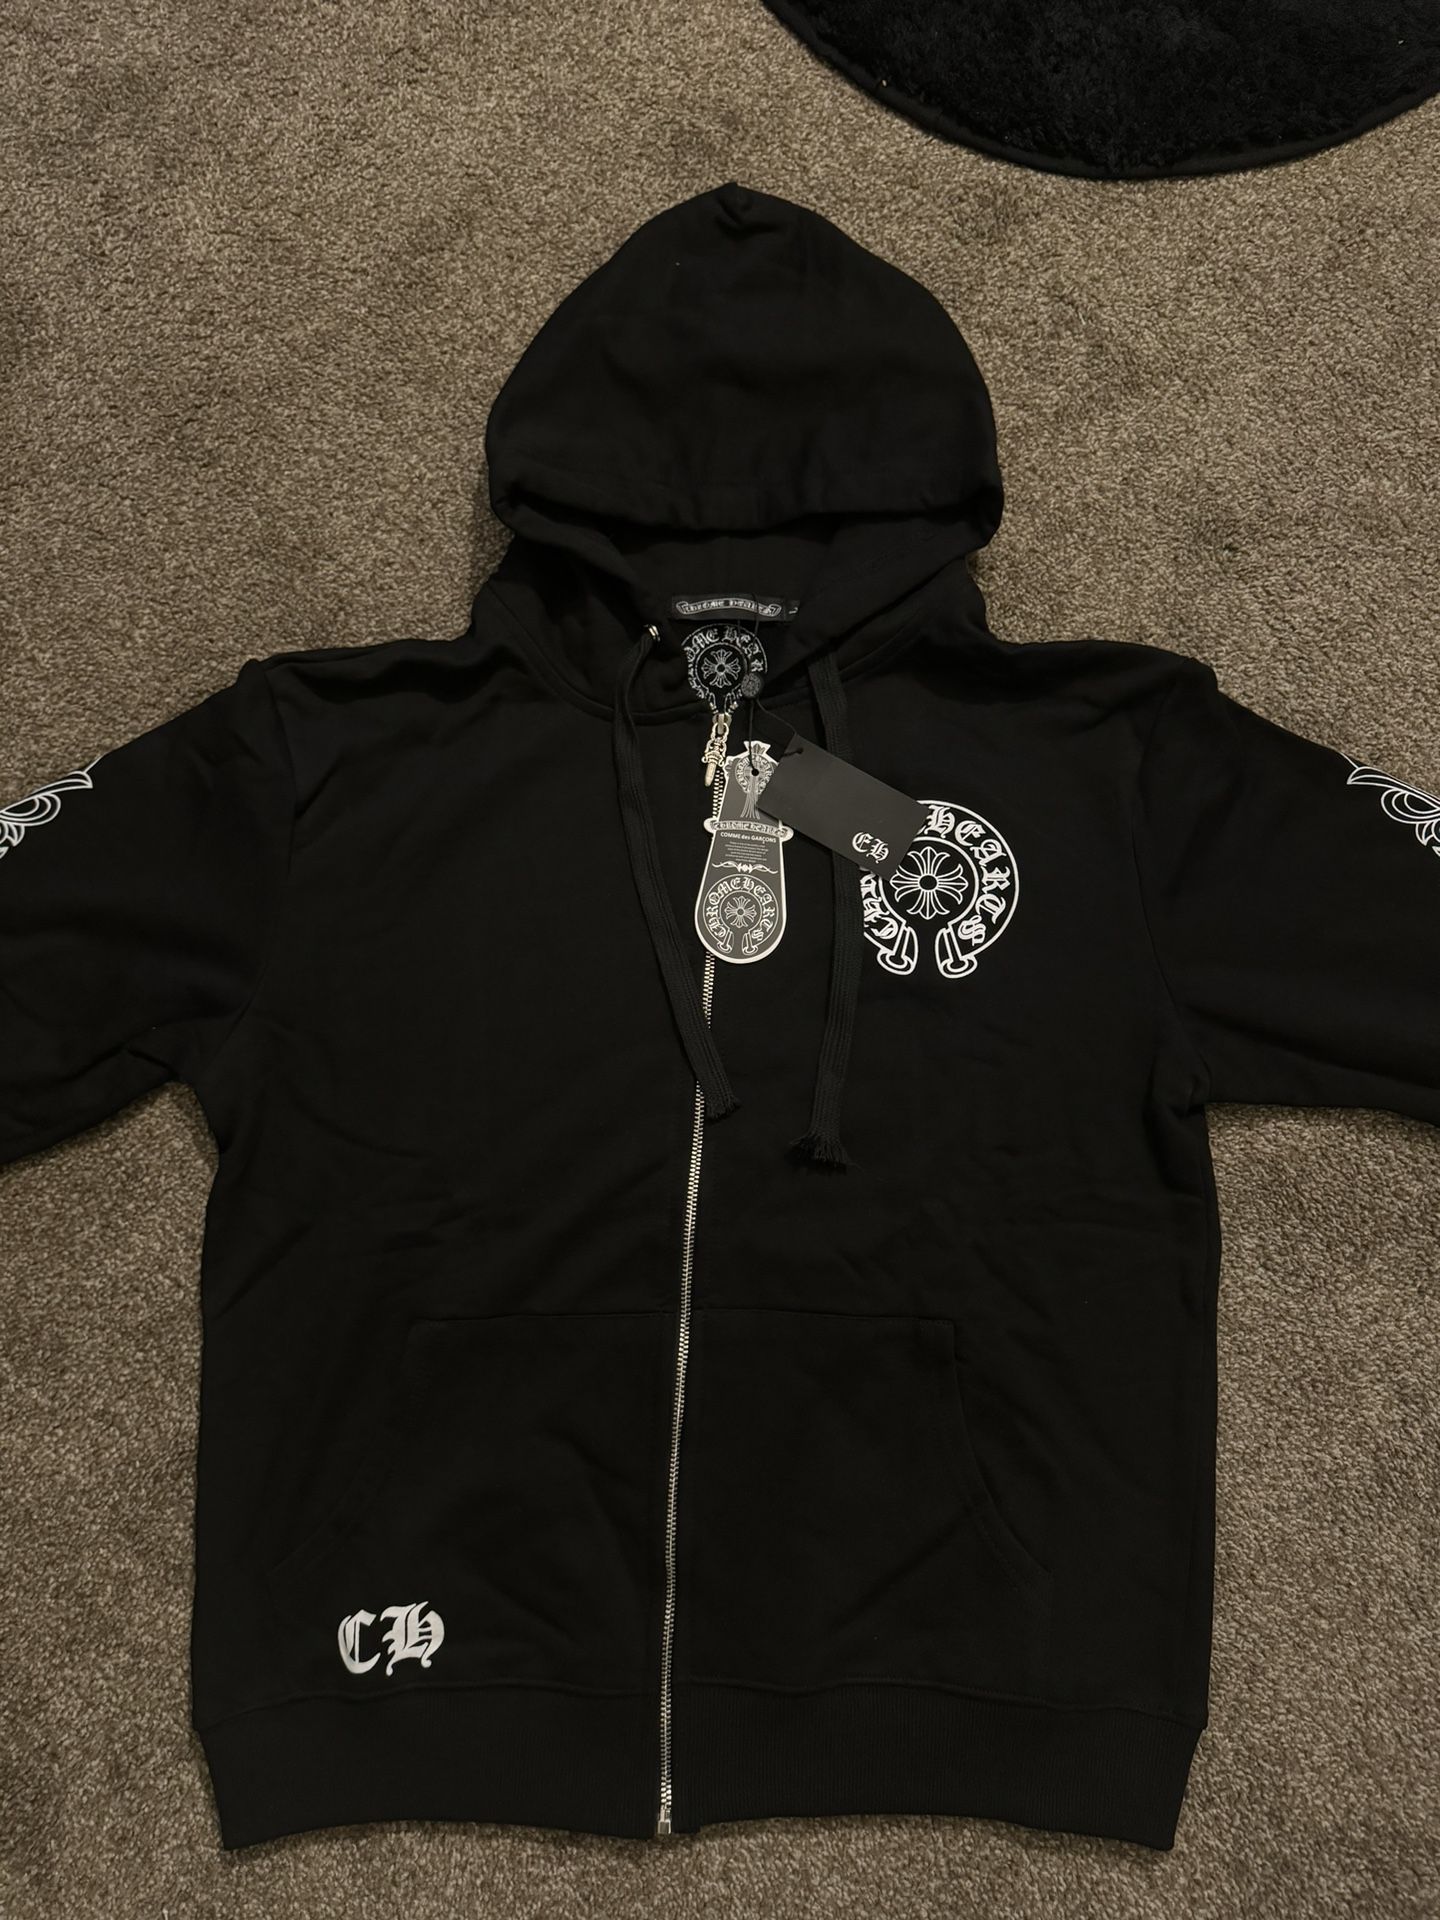 Chrome Hearts Zip Up Hoodie Los Angeles Size L 